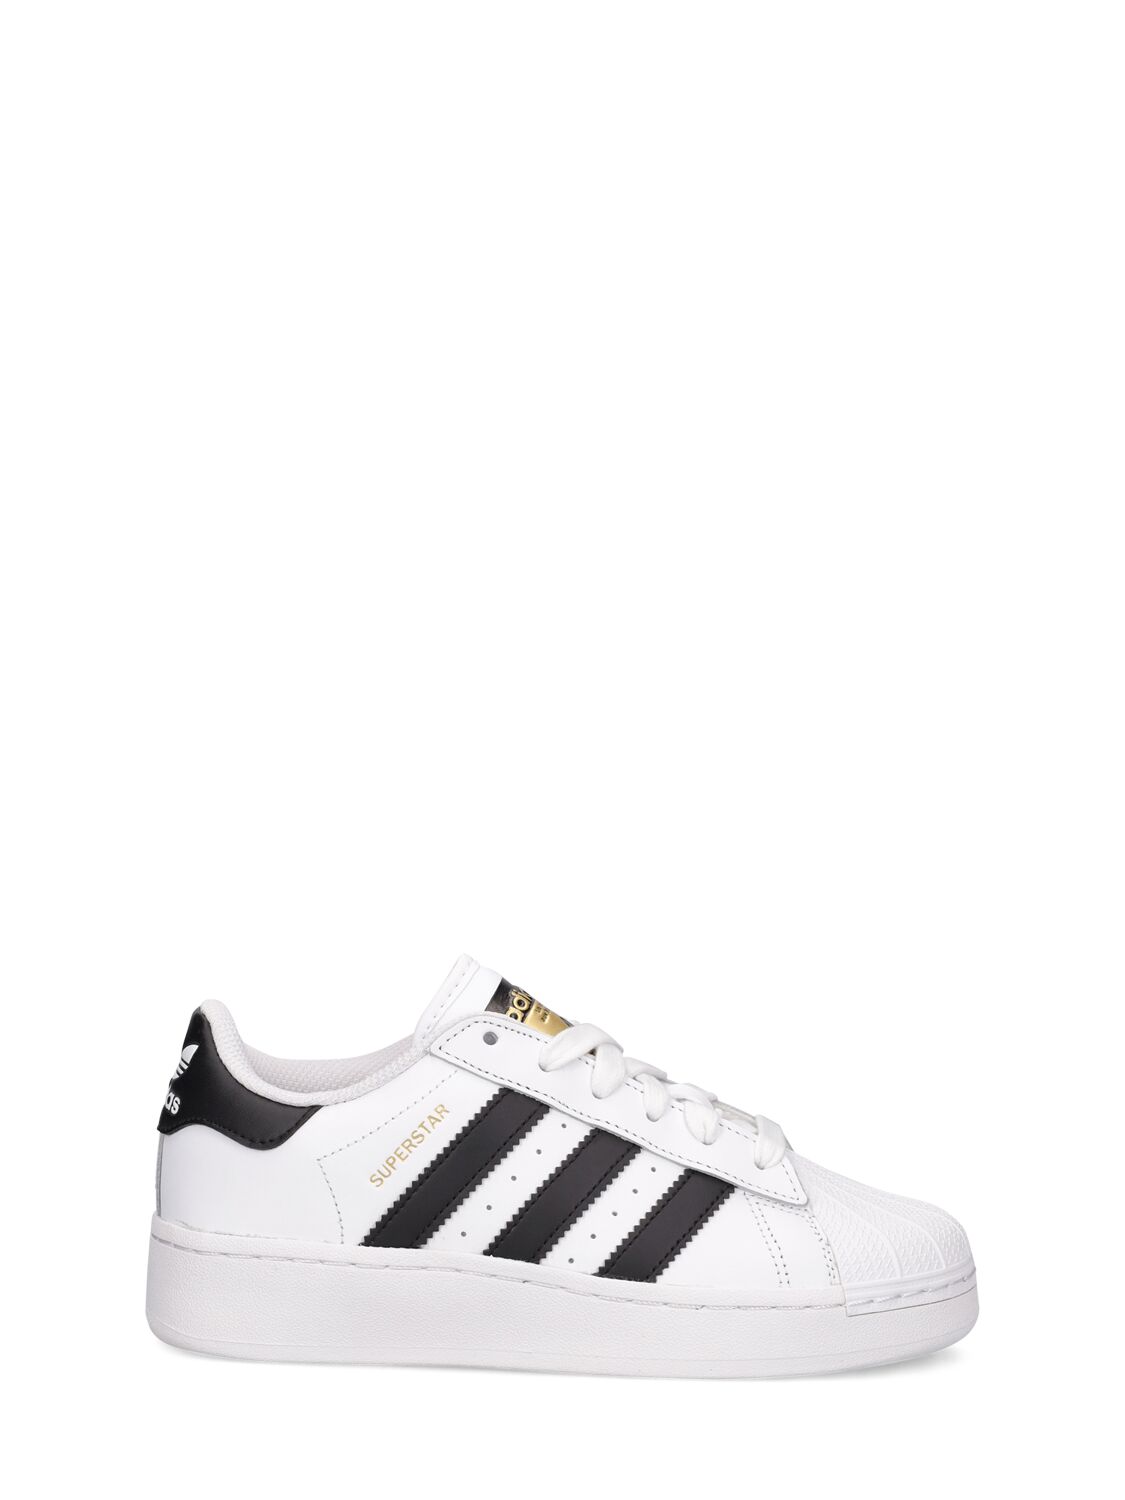 ADIDAS ORIGINALS SUPERSTAR LEATHER LACE-UP SNEAKERS